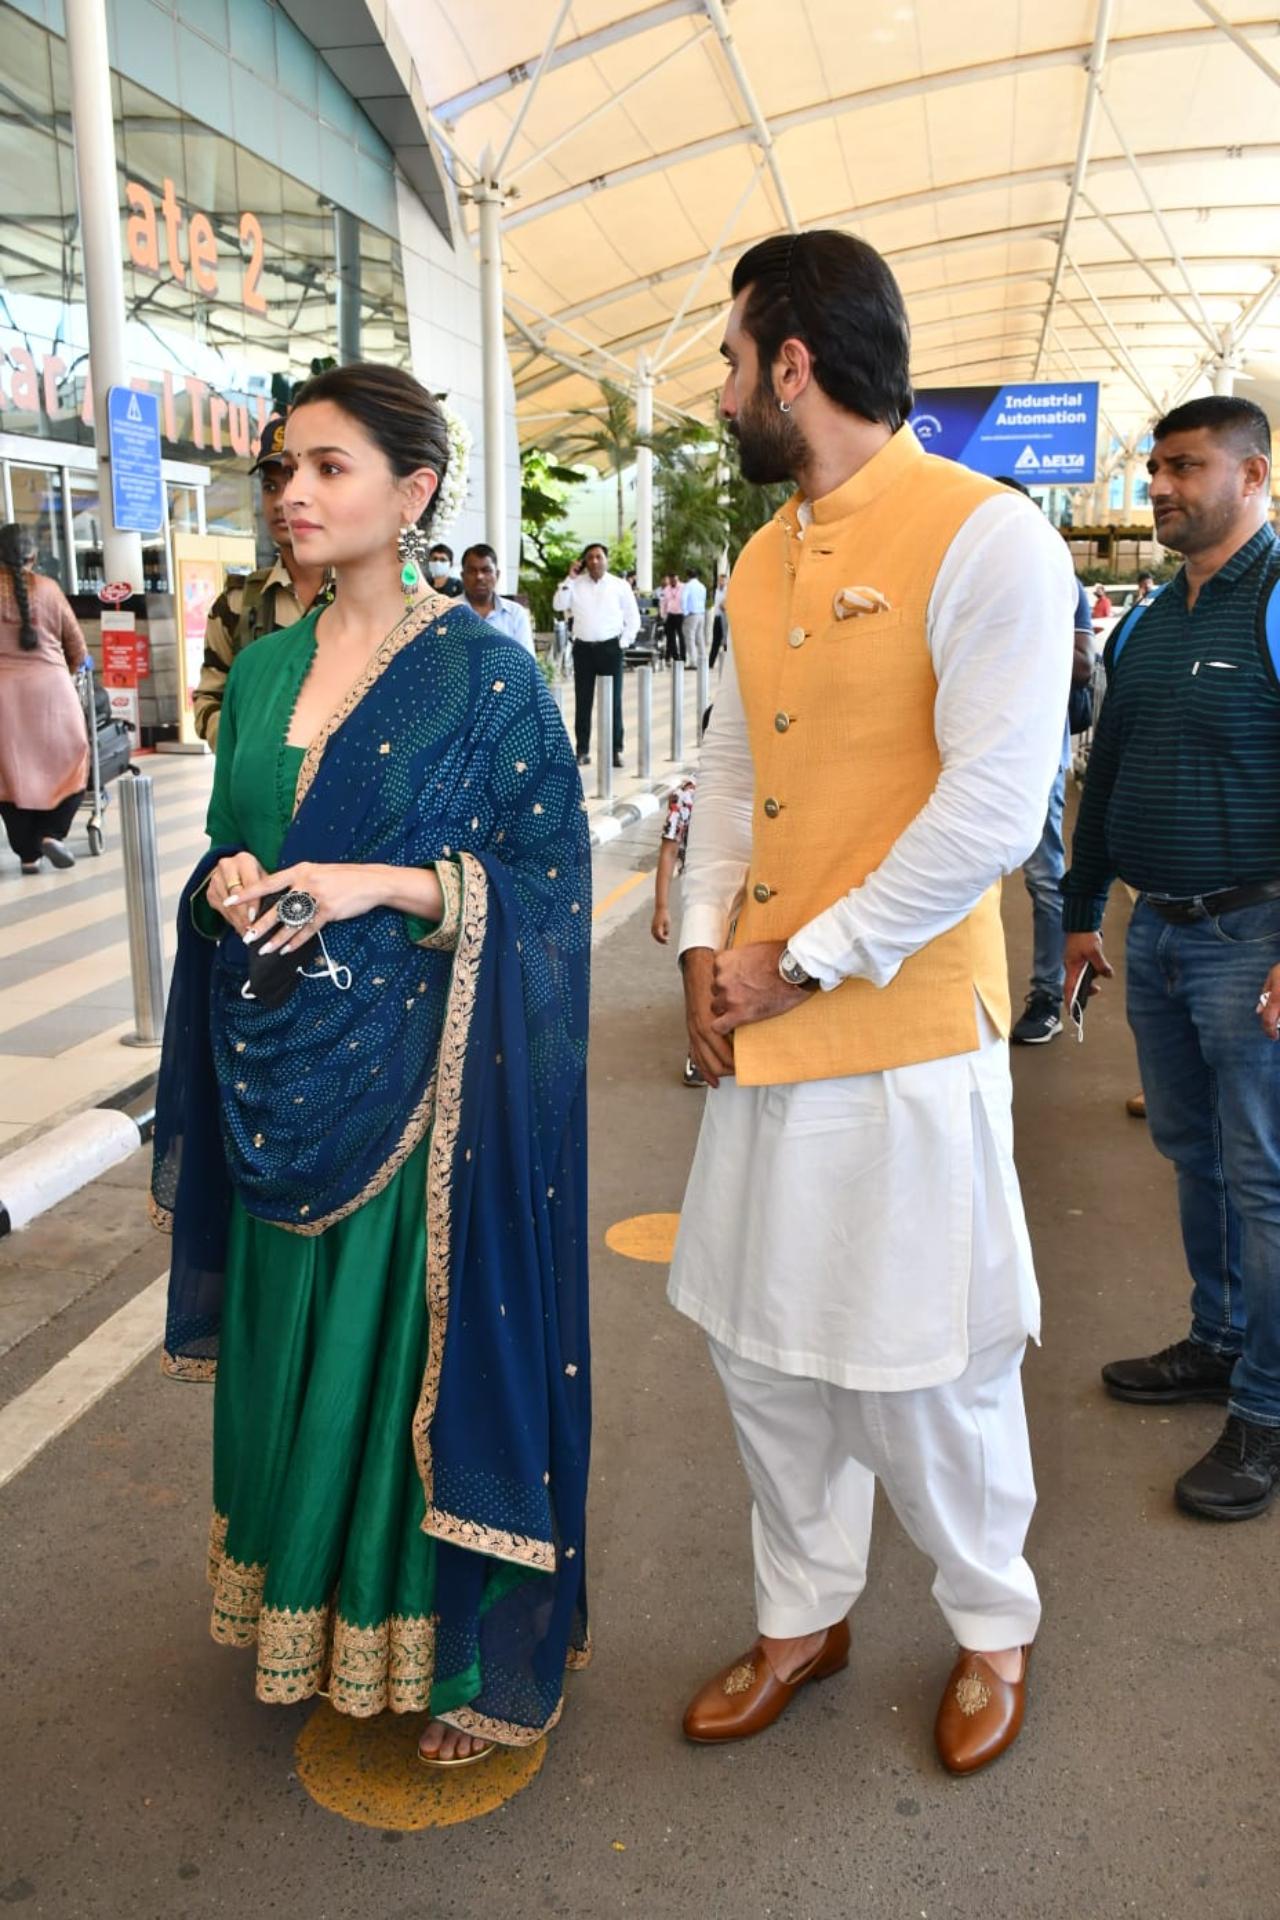 The three are currently visiting Ujjain to go to the Mahakaleshwar temple ahead of the film's release. Alia took to her Instagram handle and shared a short clip in which she along with Ranbir and Ayan were seen sitting inside a car